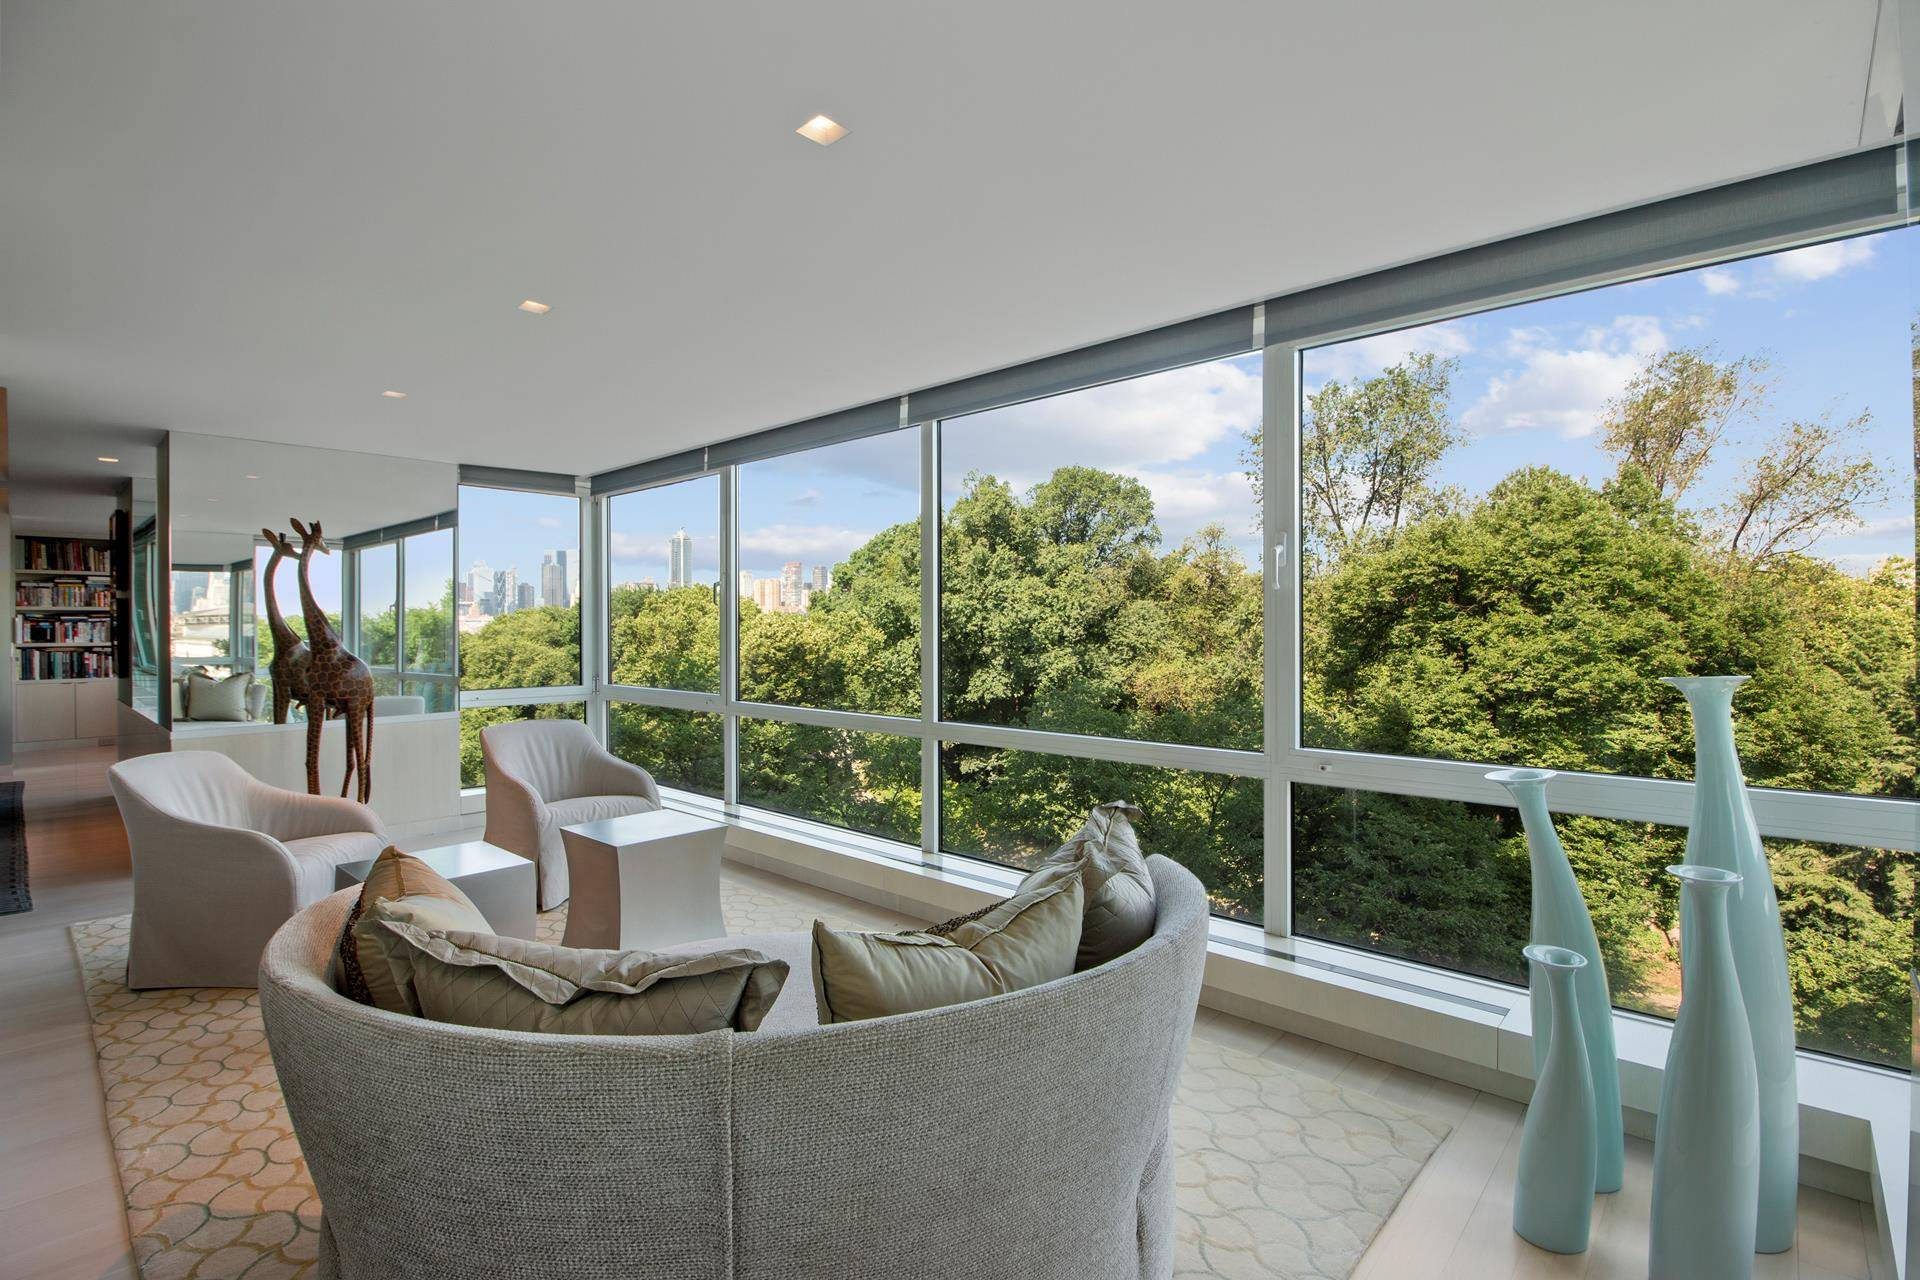 As you enter this home, you will be overwhelmed by the sophisticated design, space, light, and views.